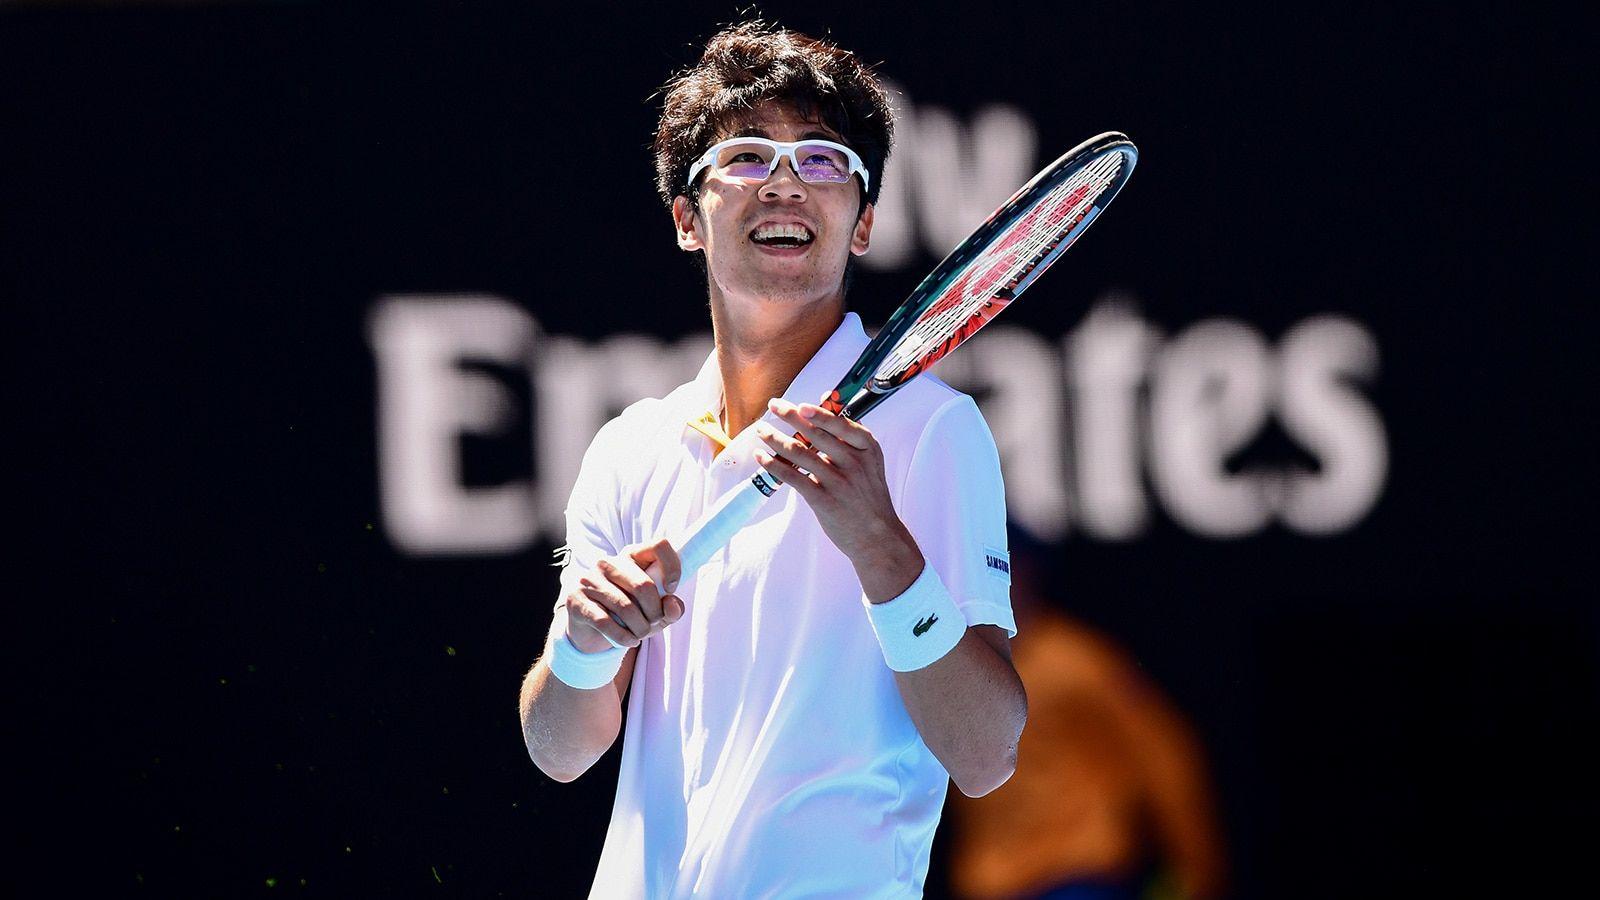 S. Korean sensation Hyeon Chung: “Not over yet”. SBS Your Language